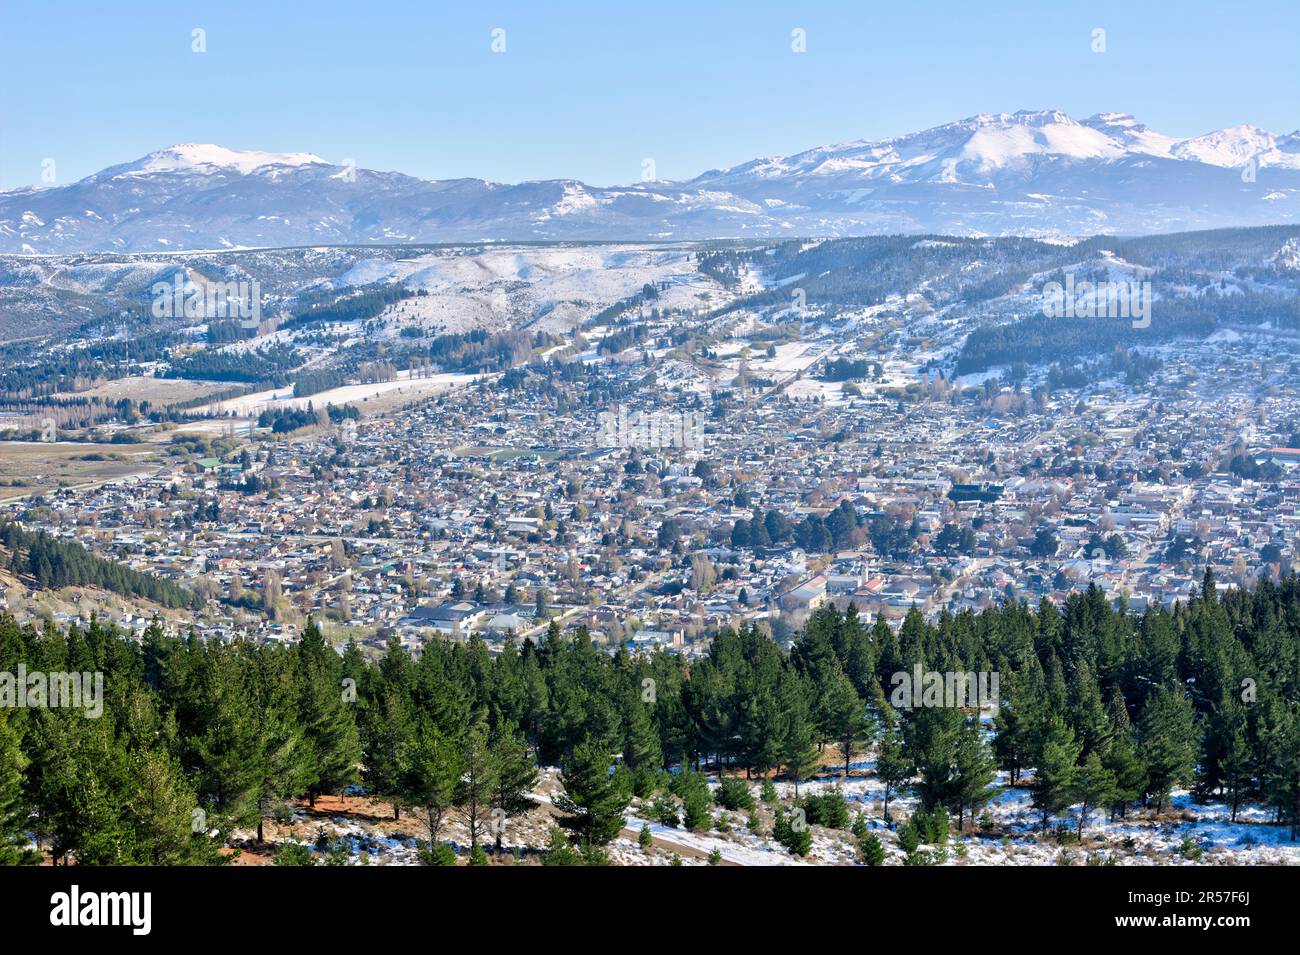 Landscapes of Esquel and surroundings, Argentina Stock Photo